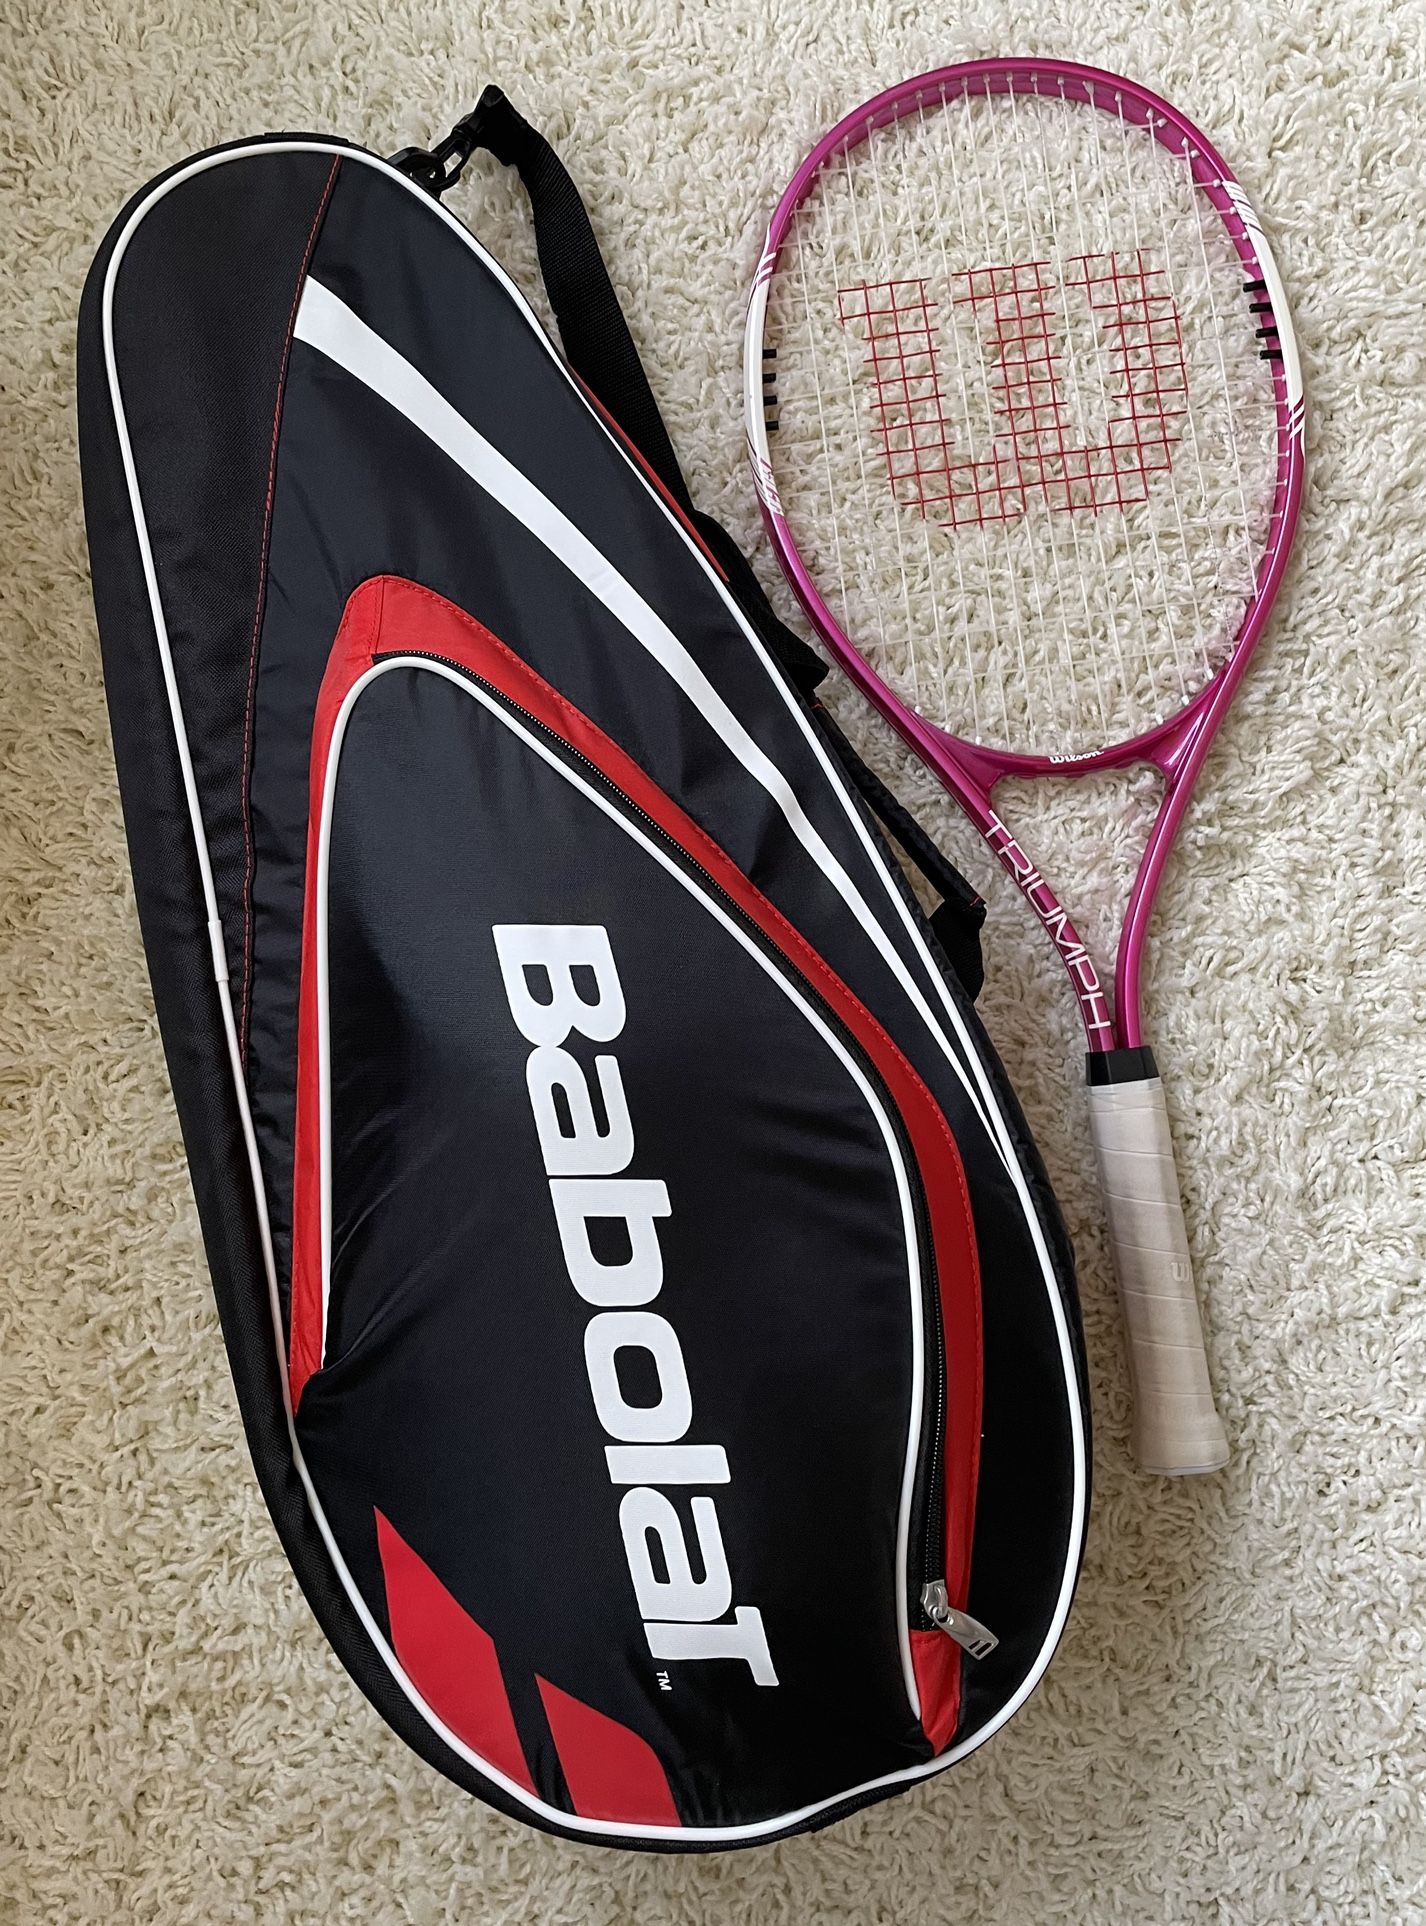 Tennis Bag And One Racket